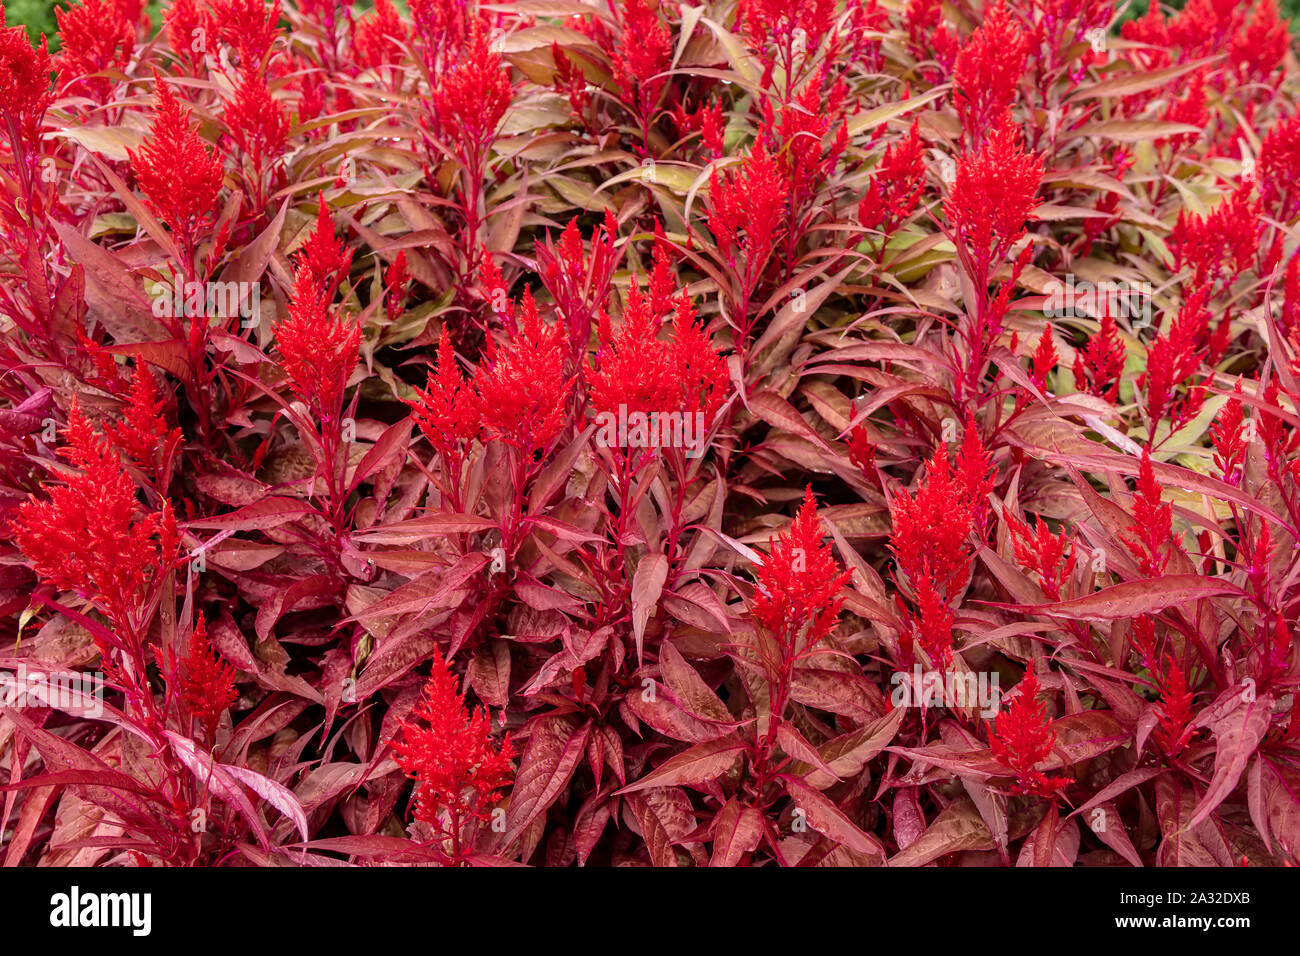 Background of bright red Celosia Dragon's Breath annual flowering plant with flame-like flower heads. Stock Photo